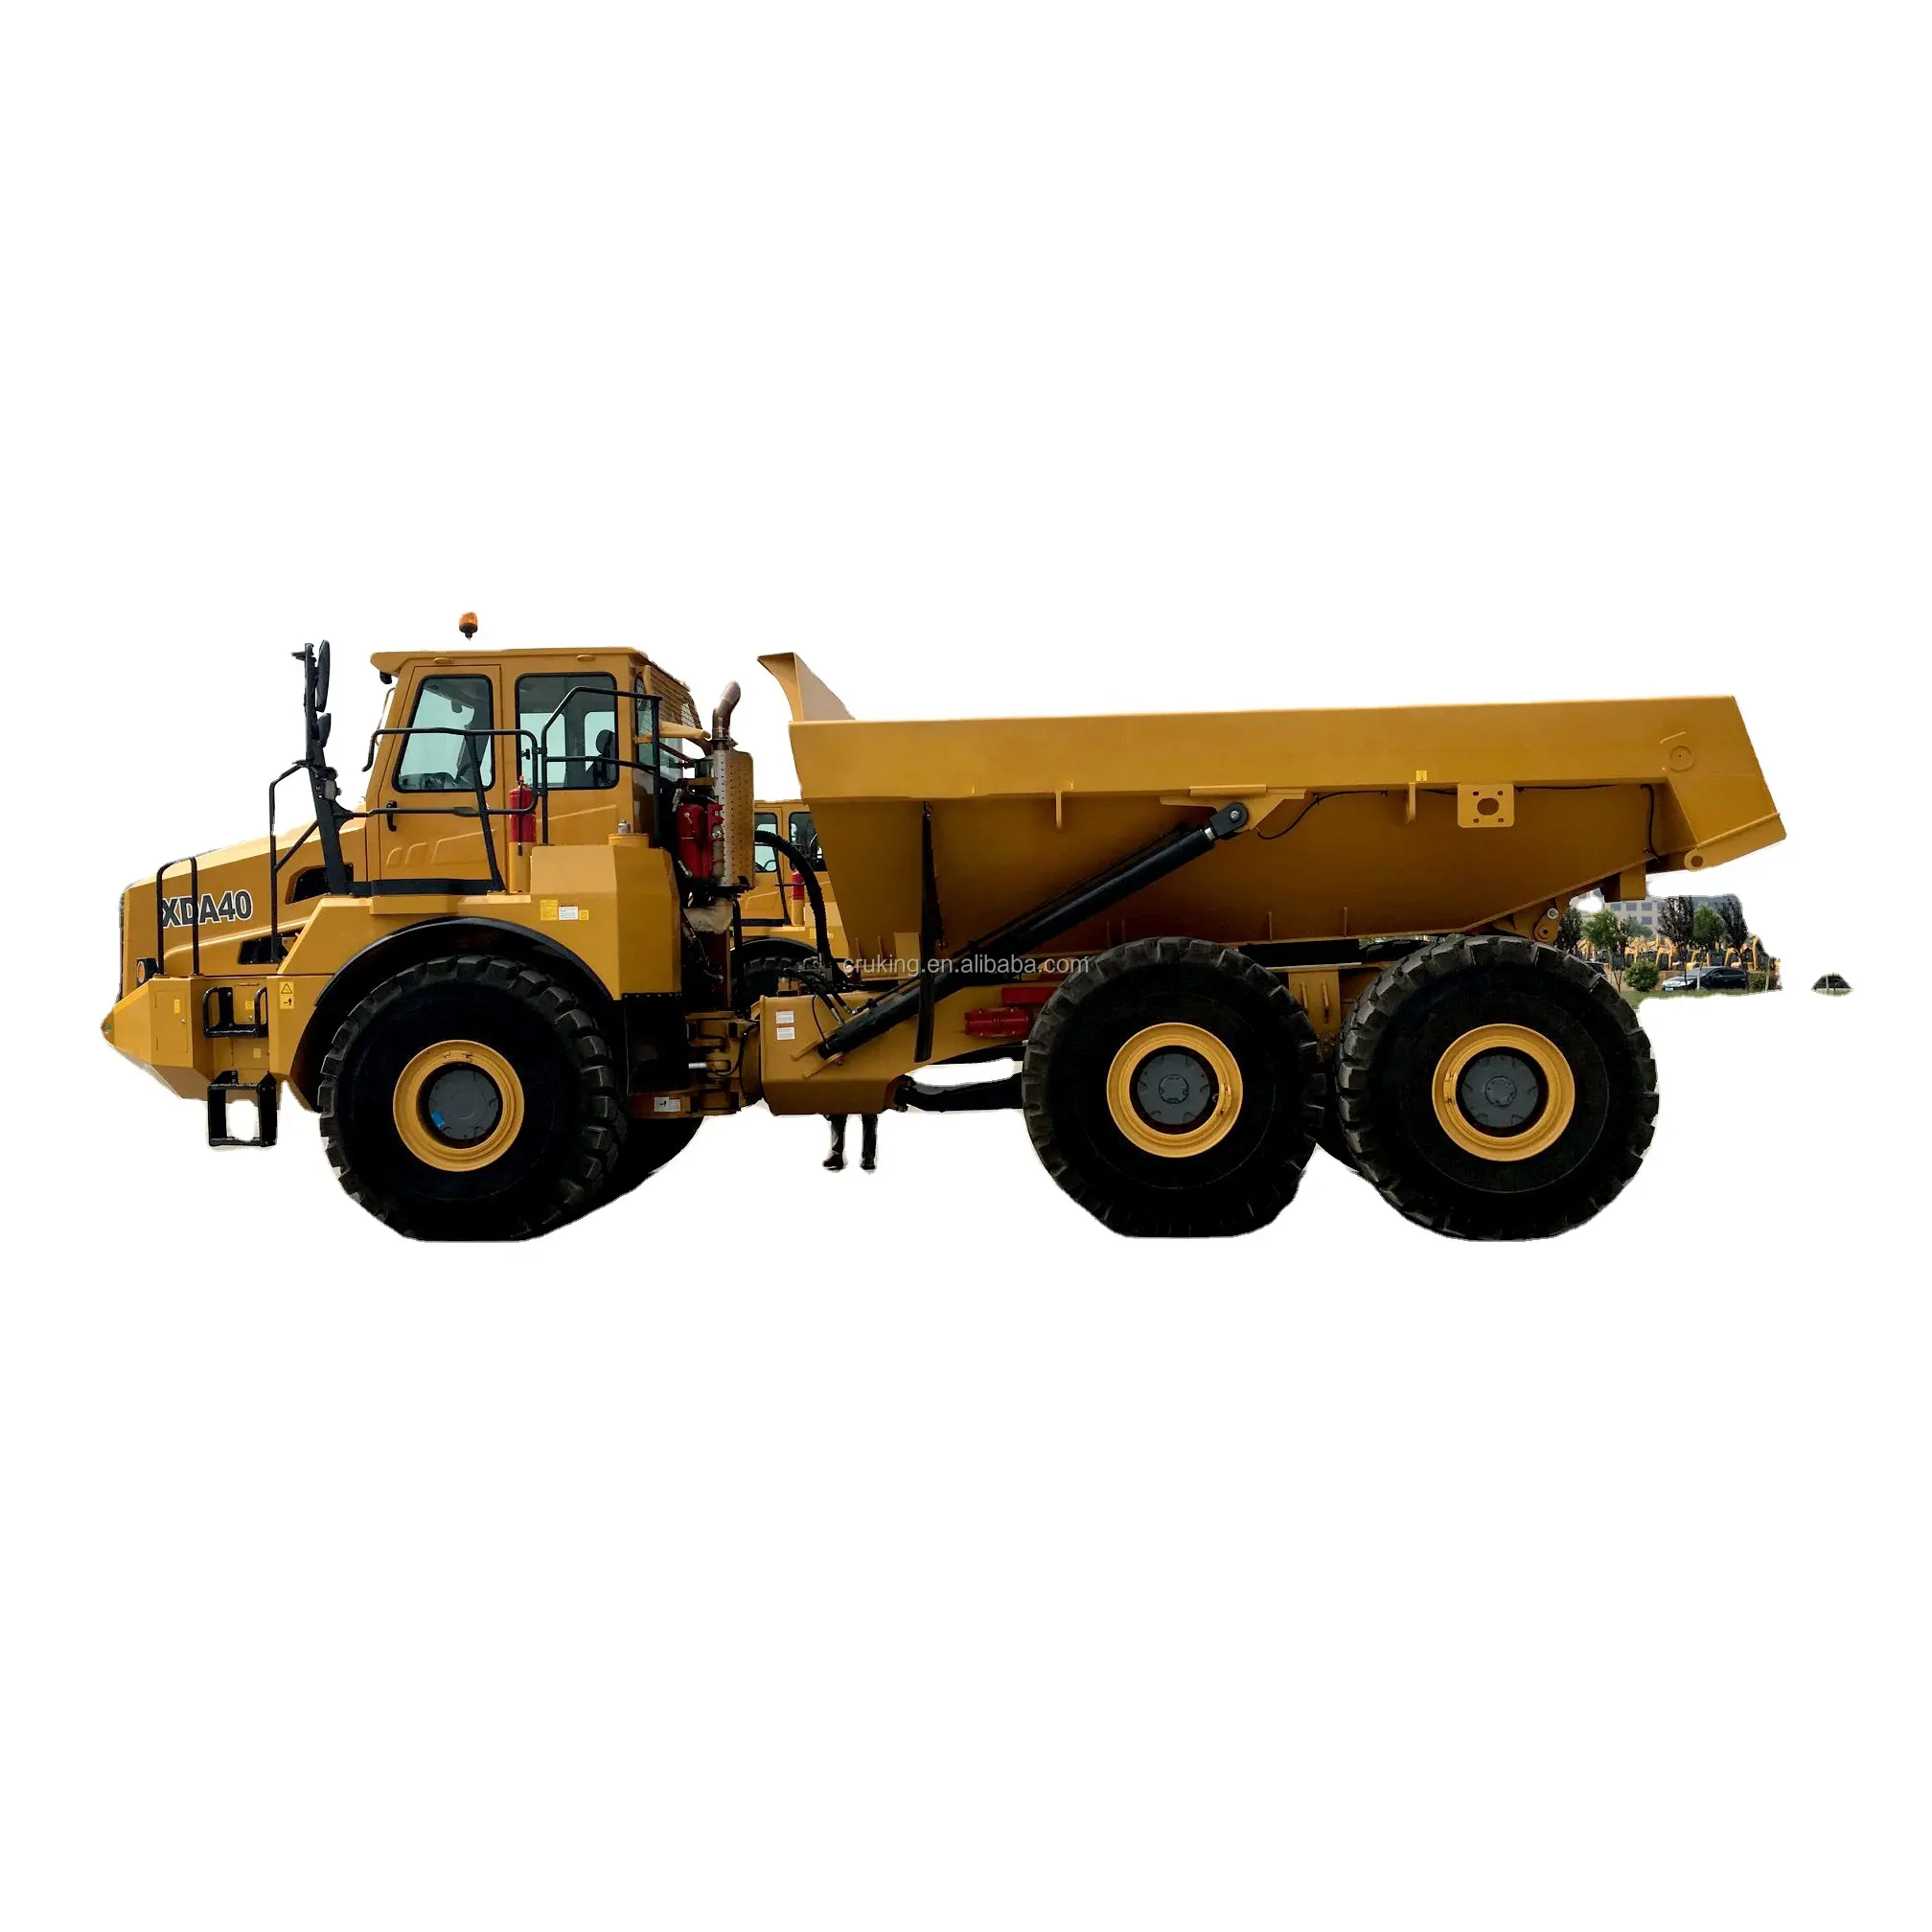 Mini small coal mining 40 ton heavy Articulated Dump Truck XDA40 well used in the cave railway station